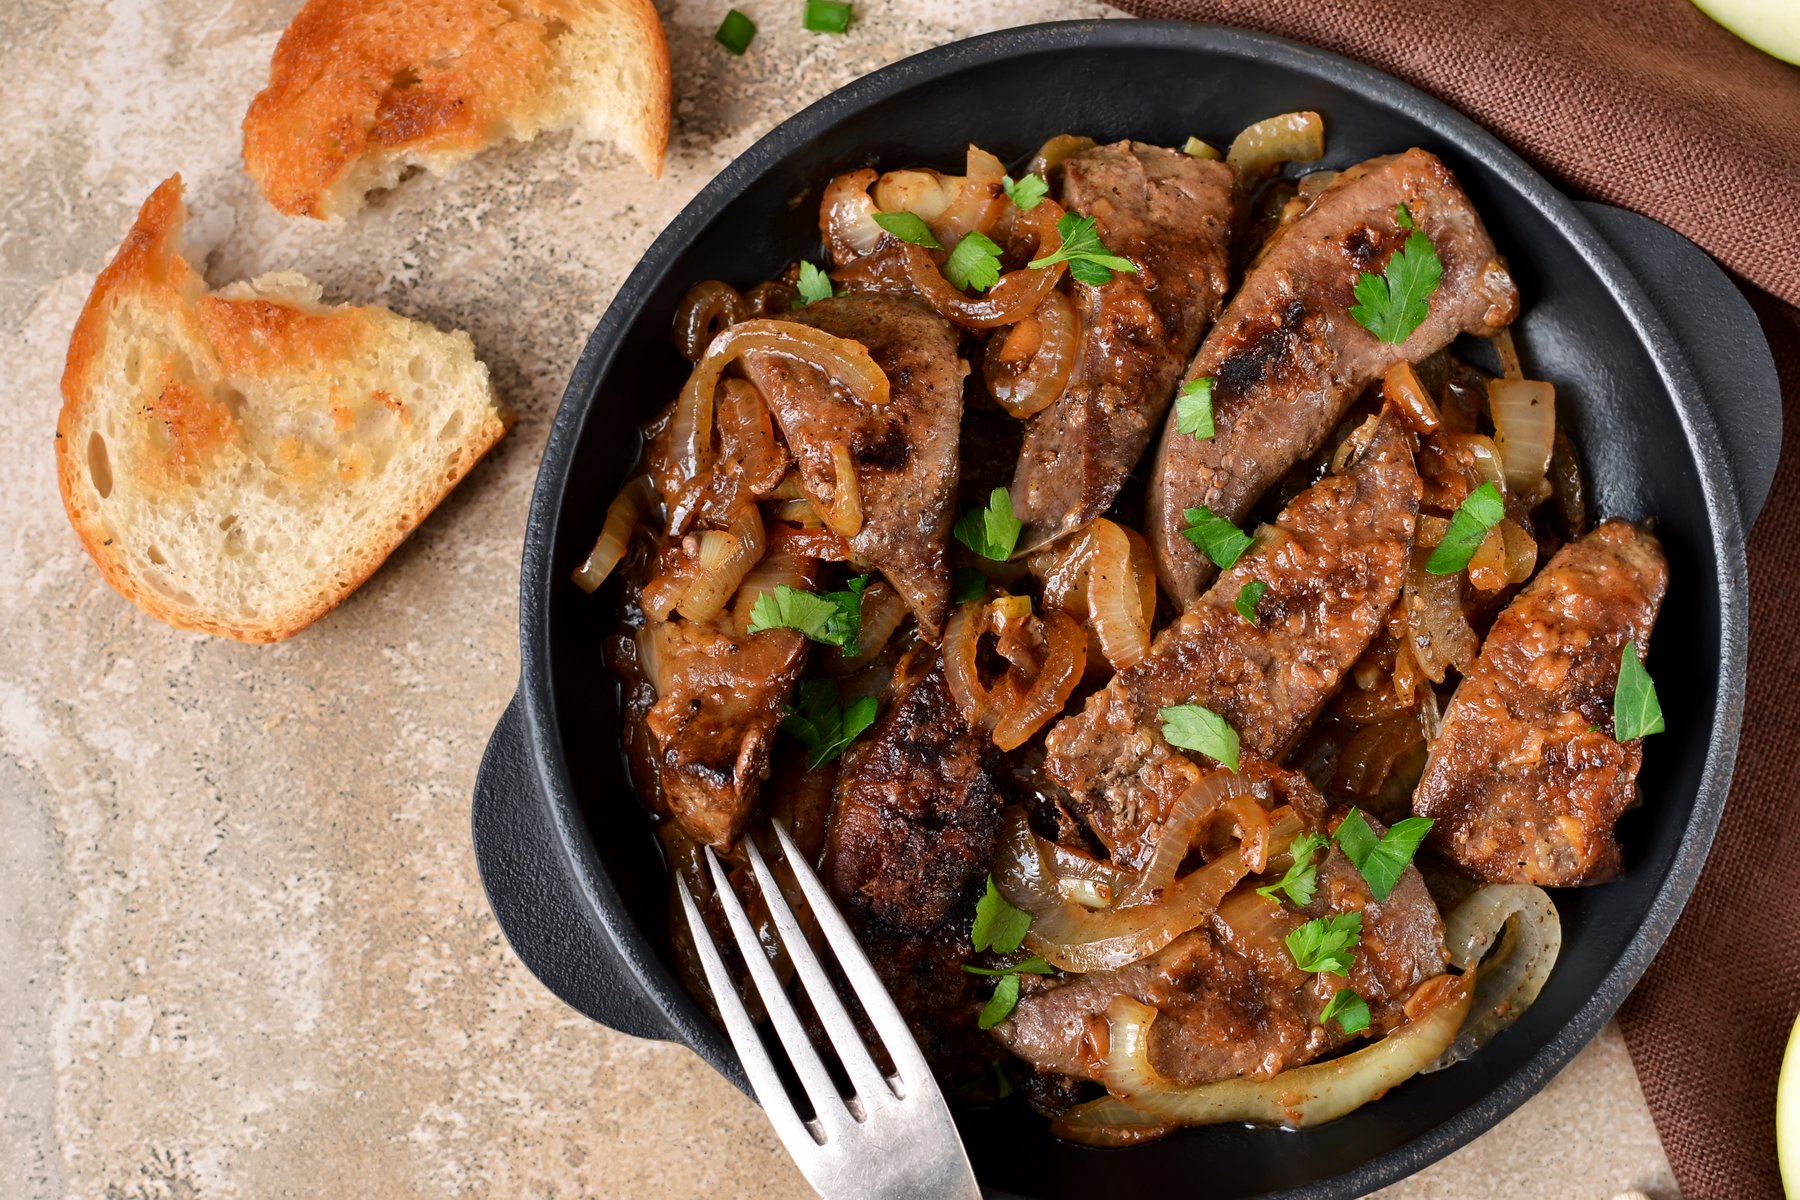 Beef liver & onions